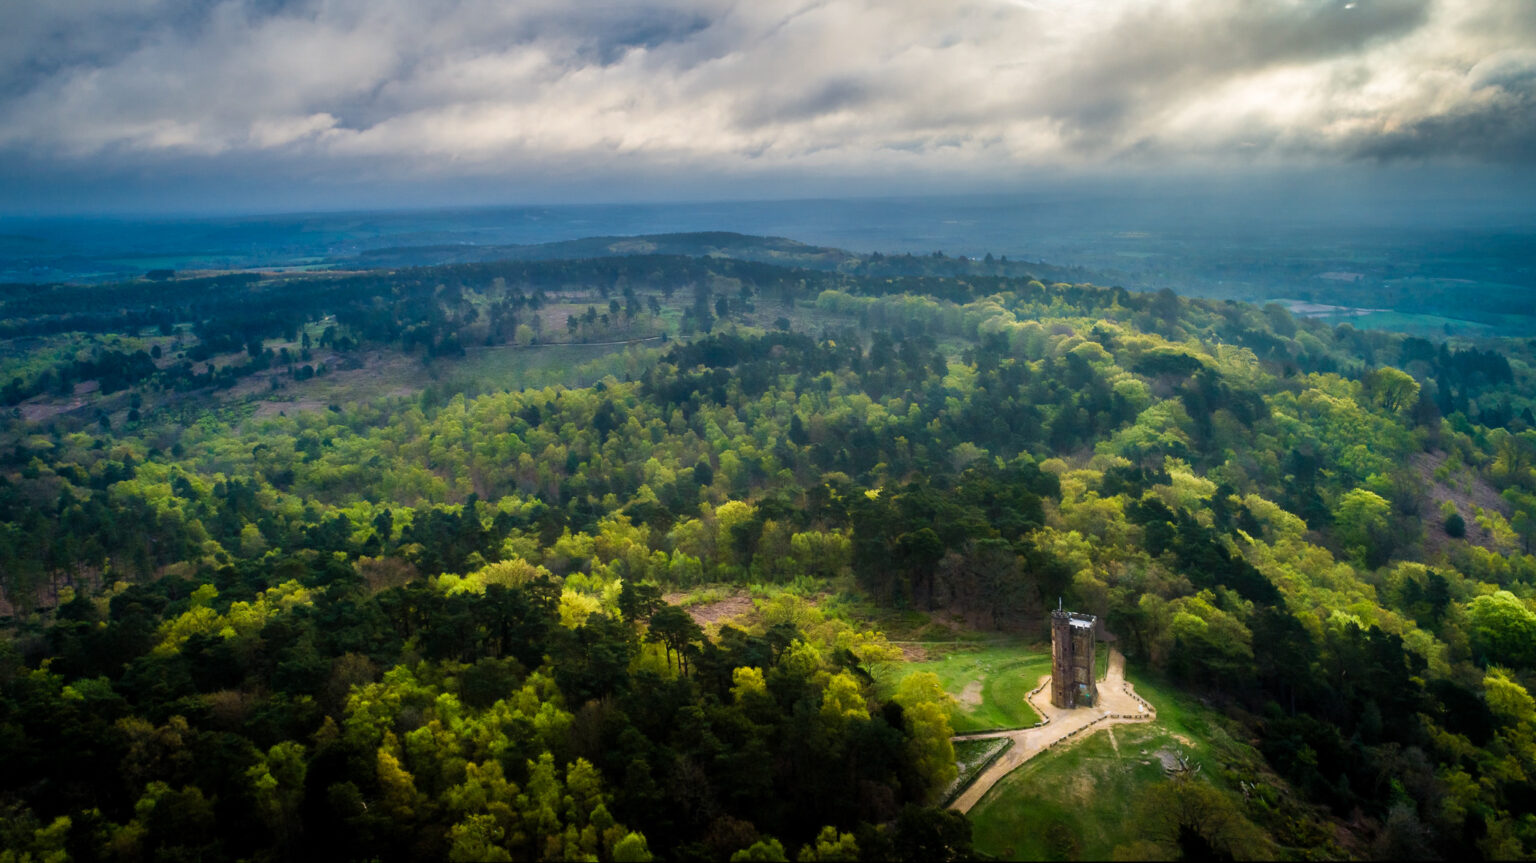 Aerial view of Leith Hill and Surrey landscape